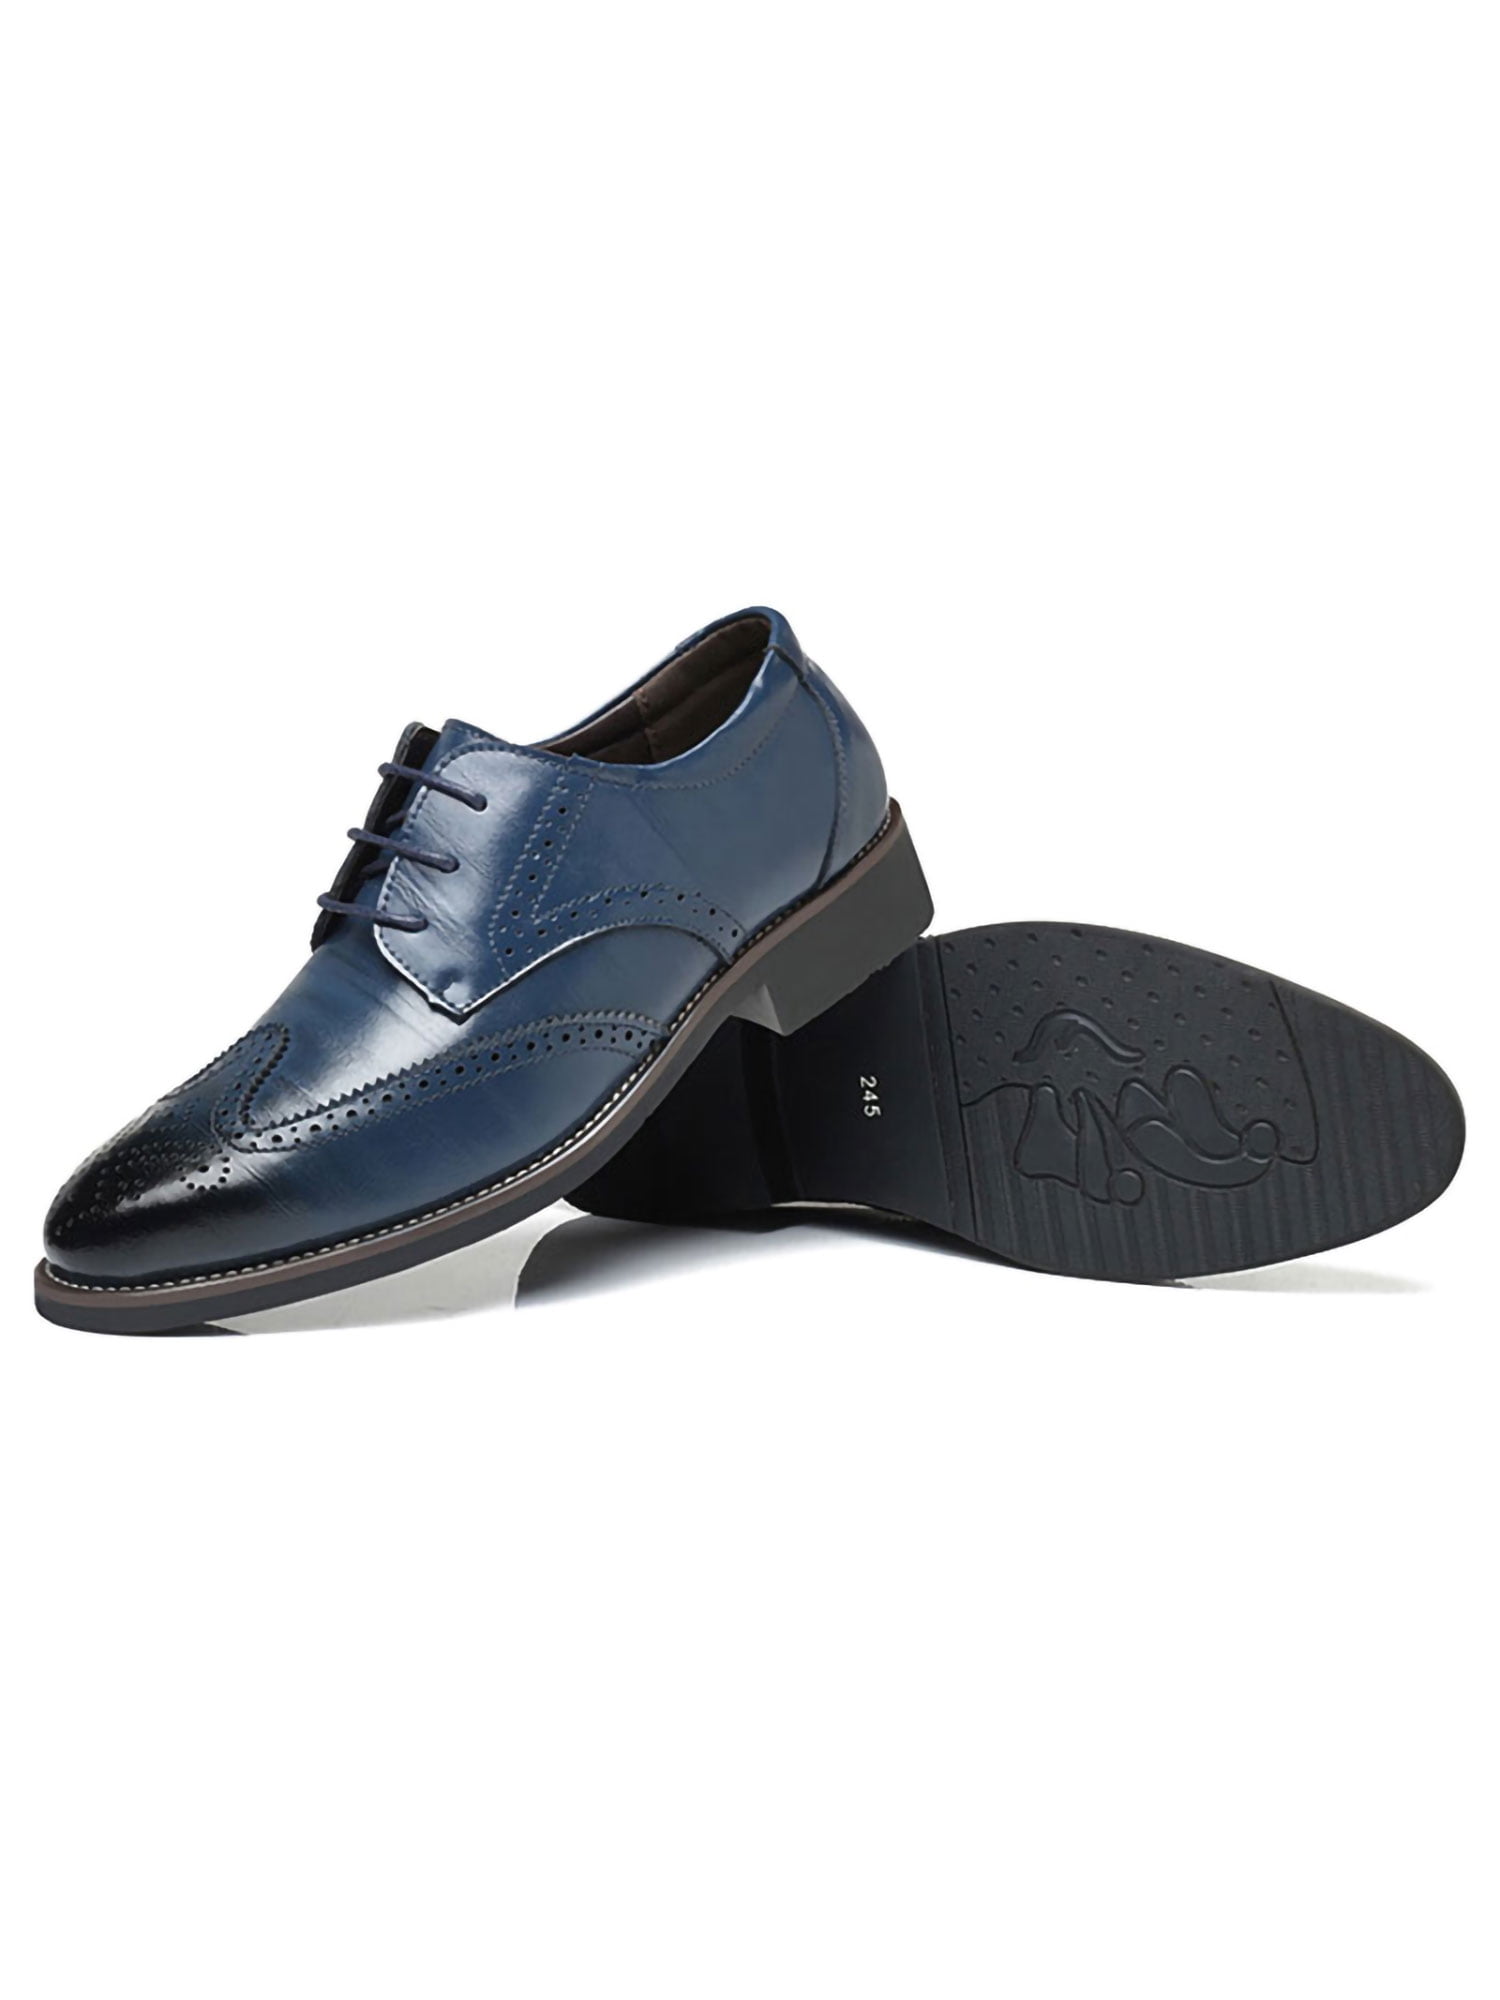 Details about   Party Mens Low Top Dress Formal Leather Shoes Slip on Shiny Oxfords Pointy Toe 